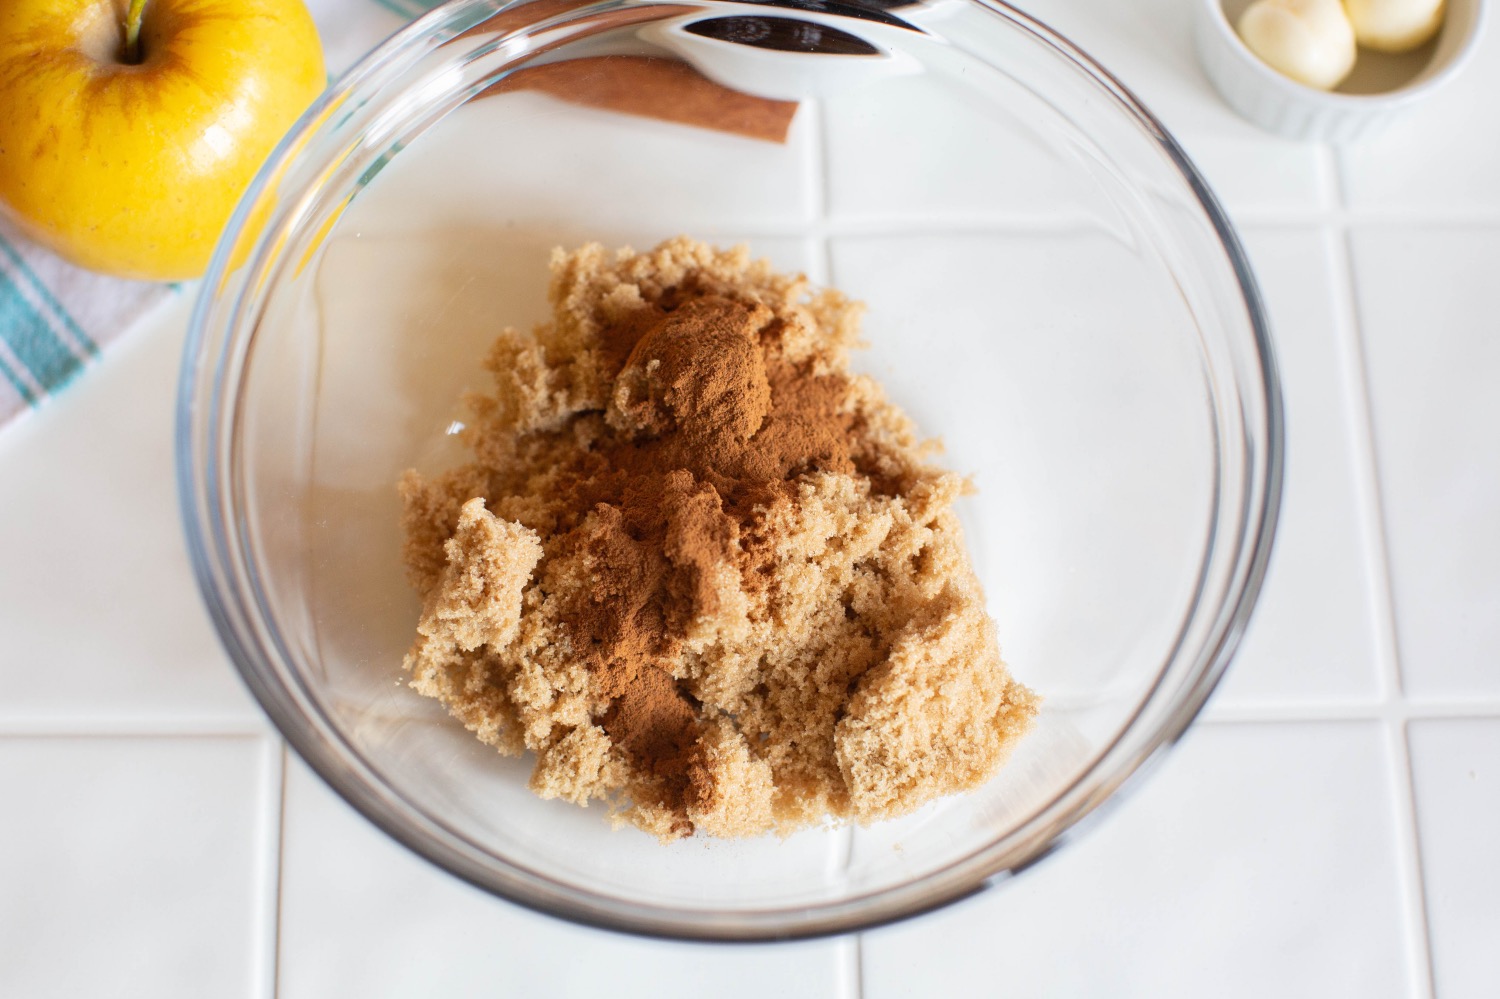 mix together the cinnamon and brown sugar